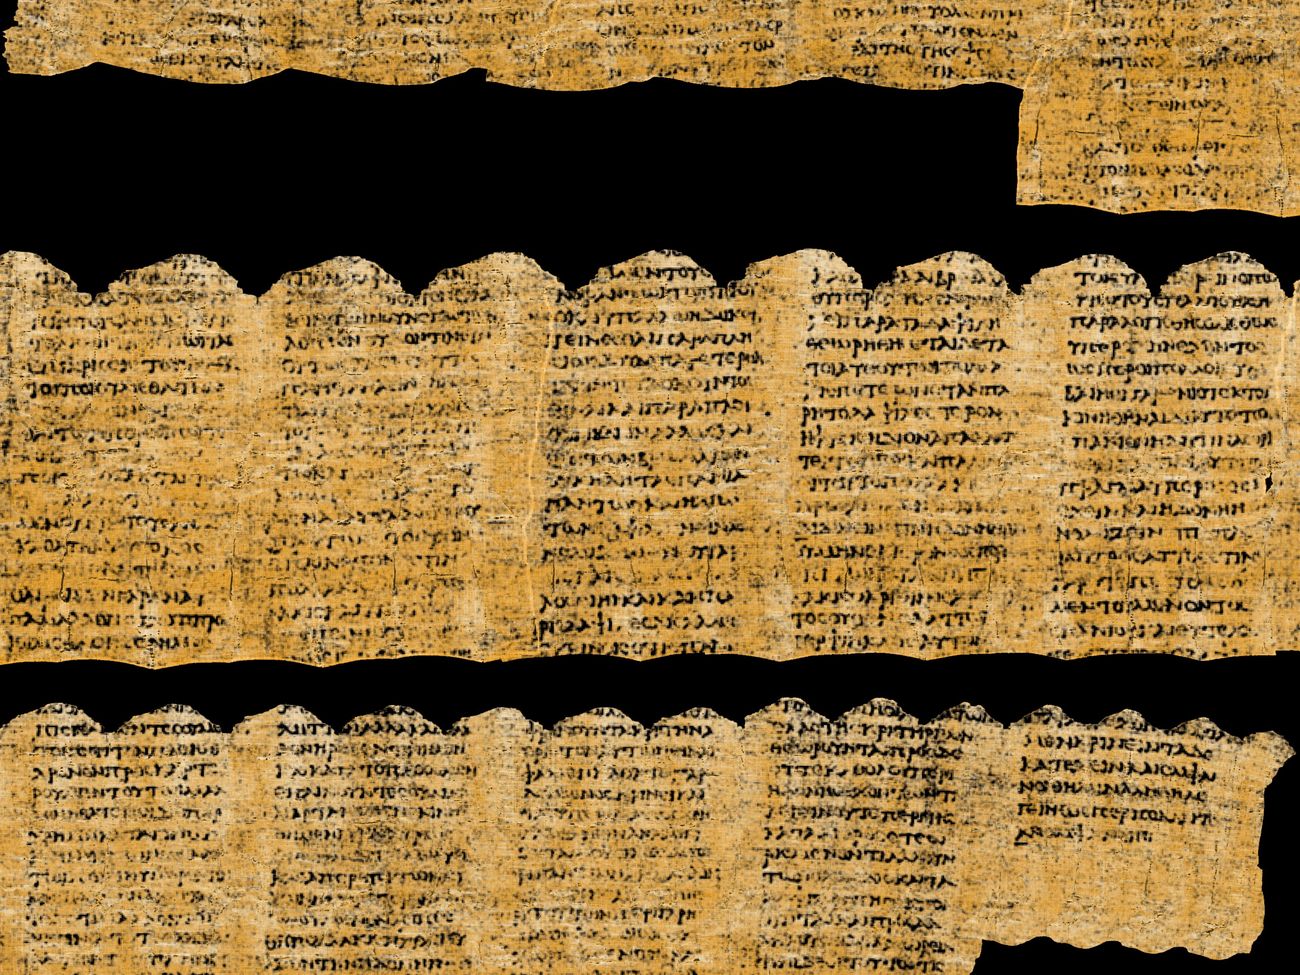 this newly deciphered papyrus scroll reveals the location of plato's grave